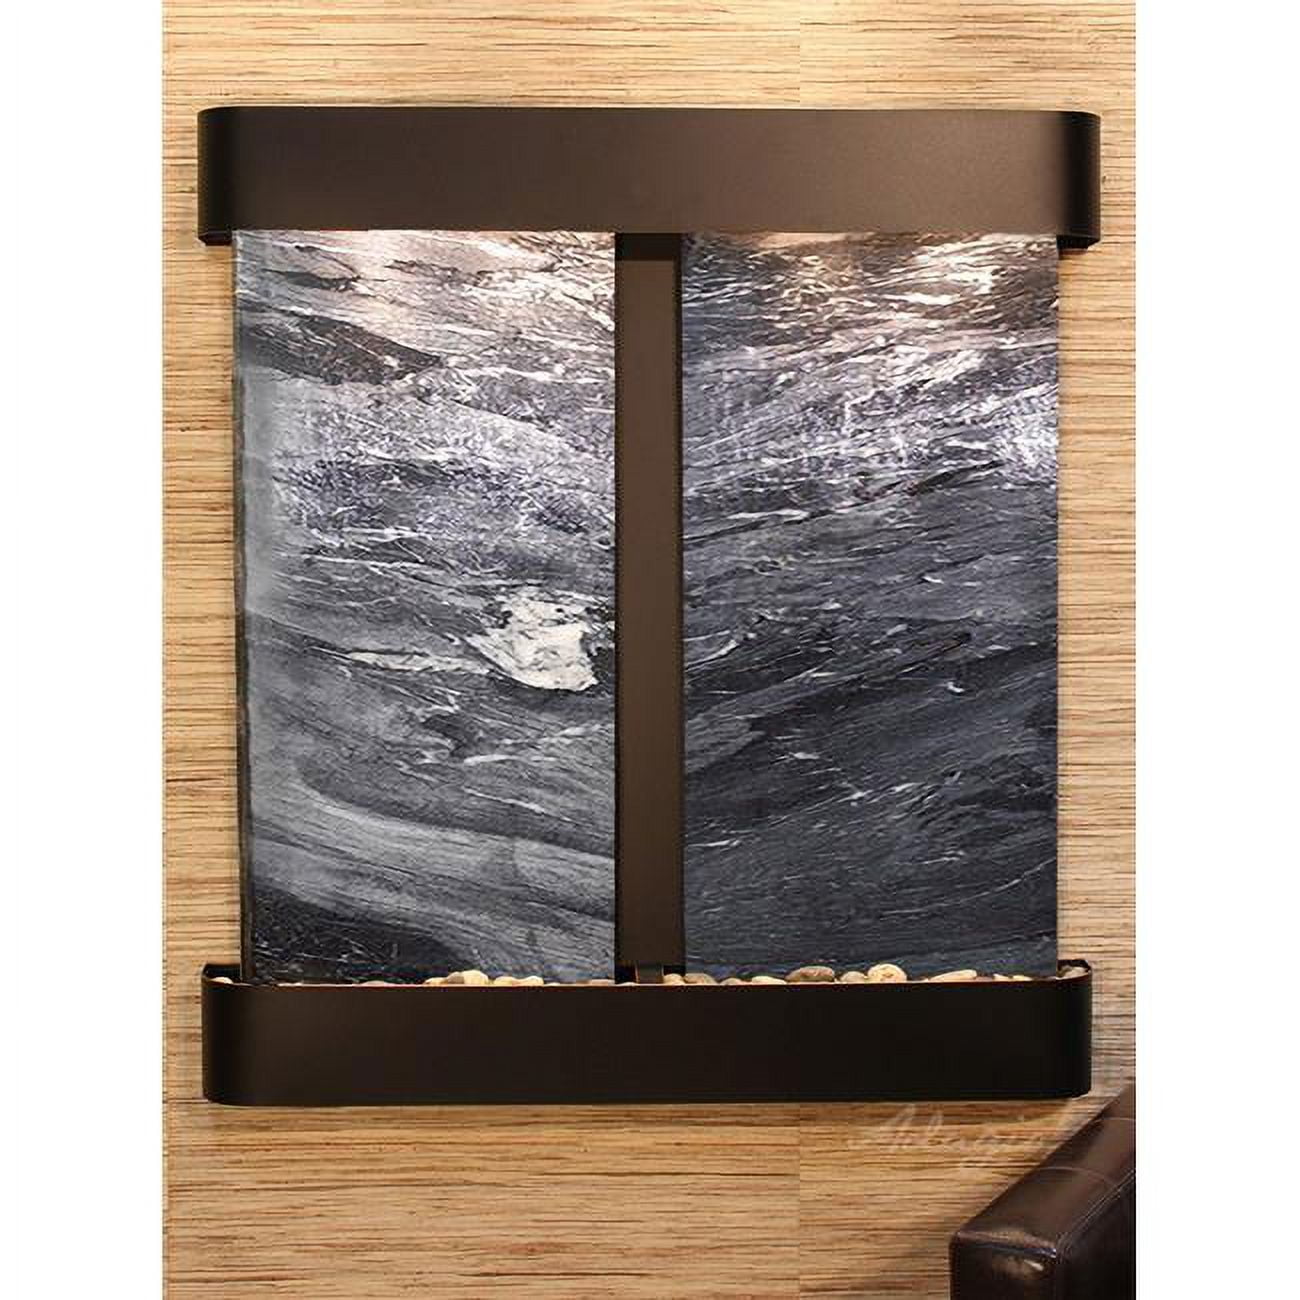 Picture of Adagio AFR1507 Aspen Falls Round Wall Fountain - Blackened Copper-Black Spider Marble